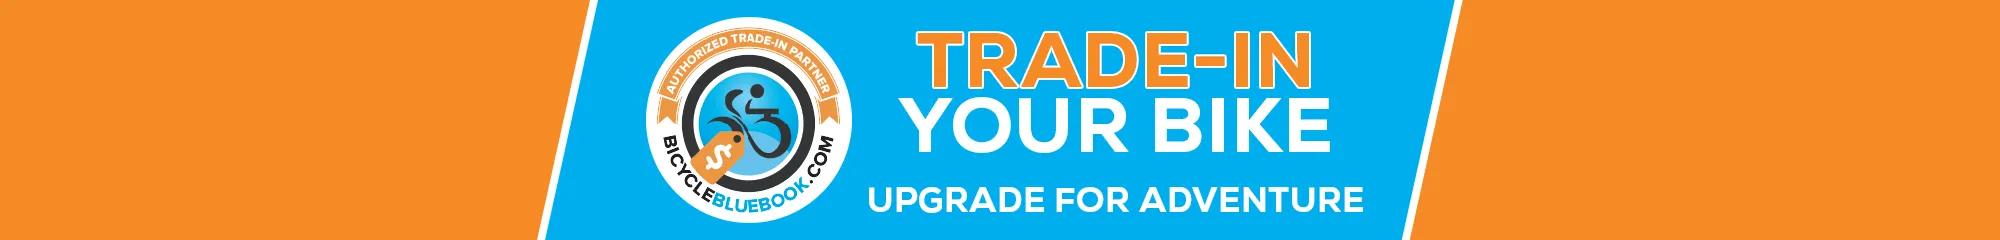 What's your bike worth? Upgrade your ride Trade in your bike today!